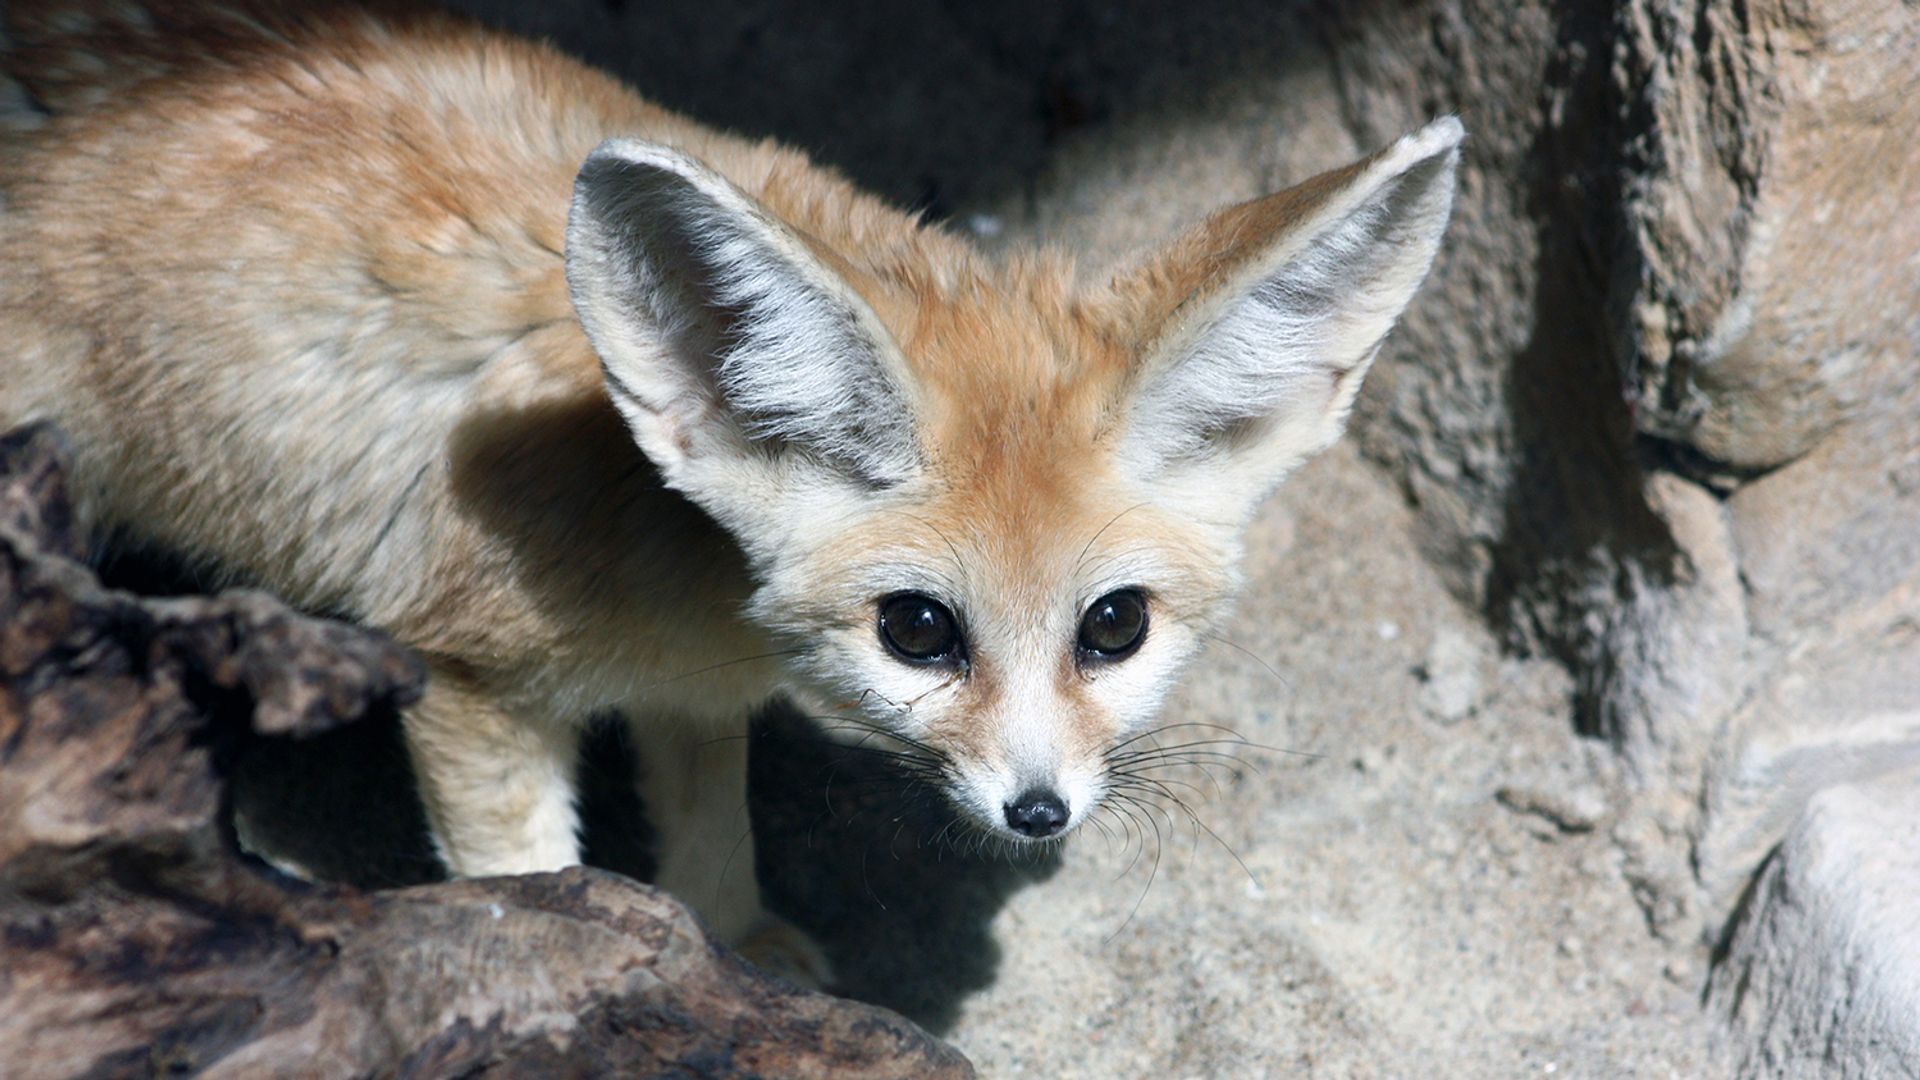 Zoo welcomes world's smallest foxes